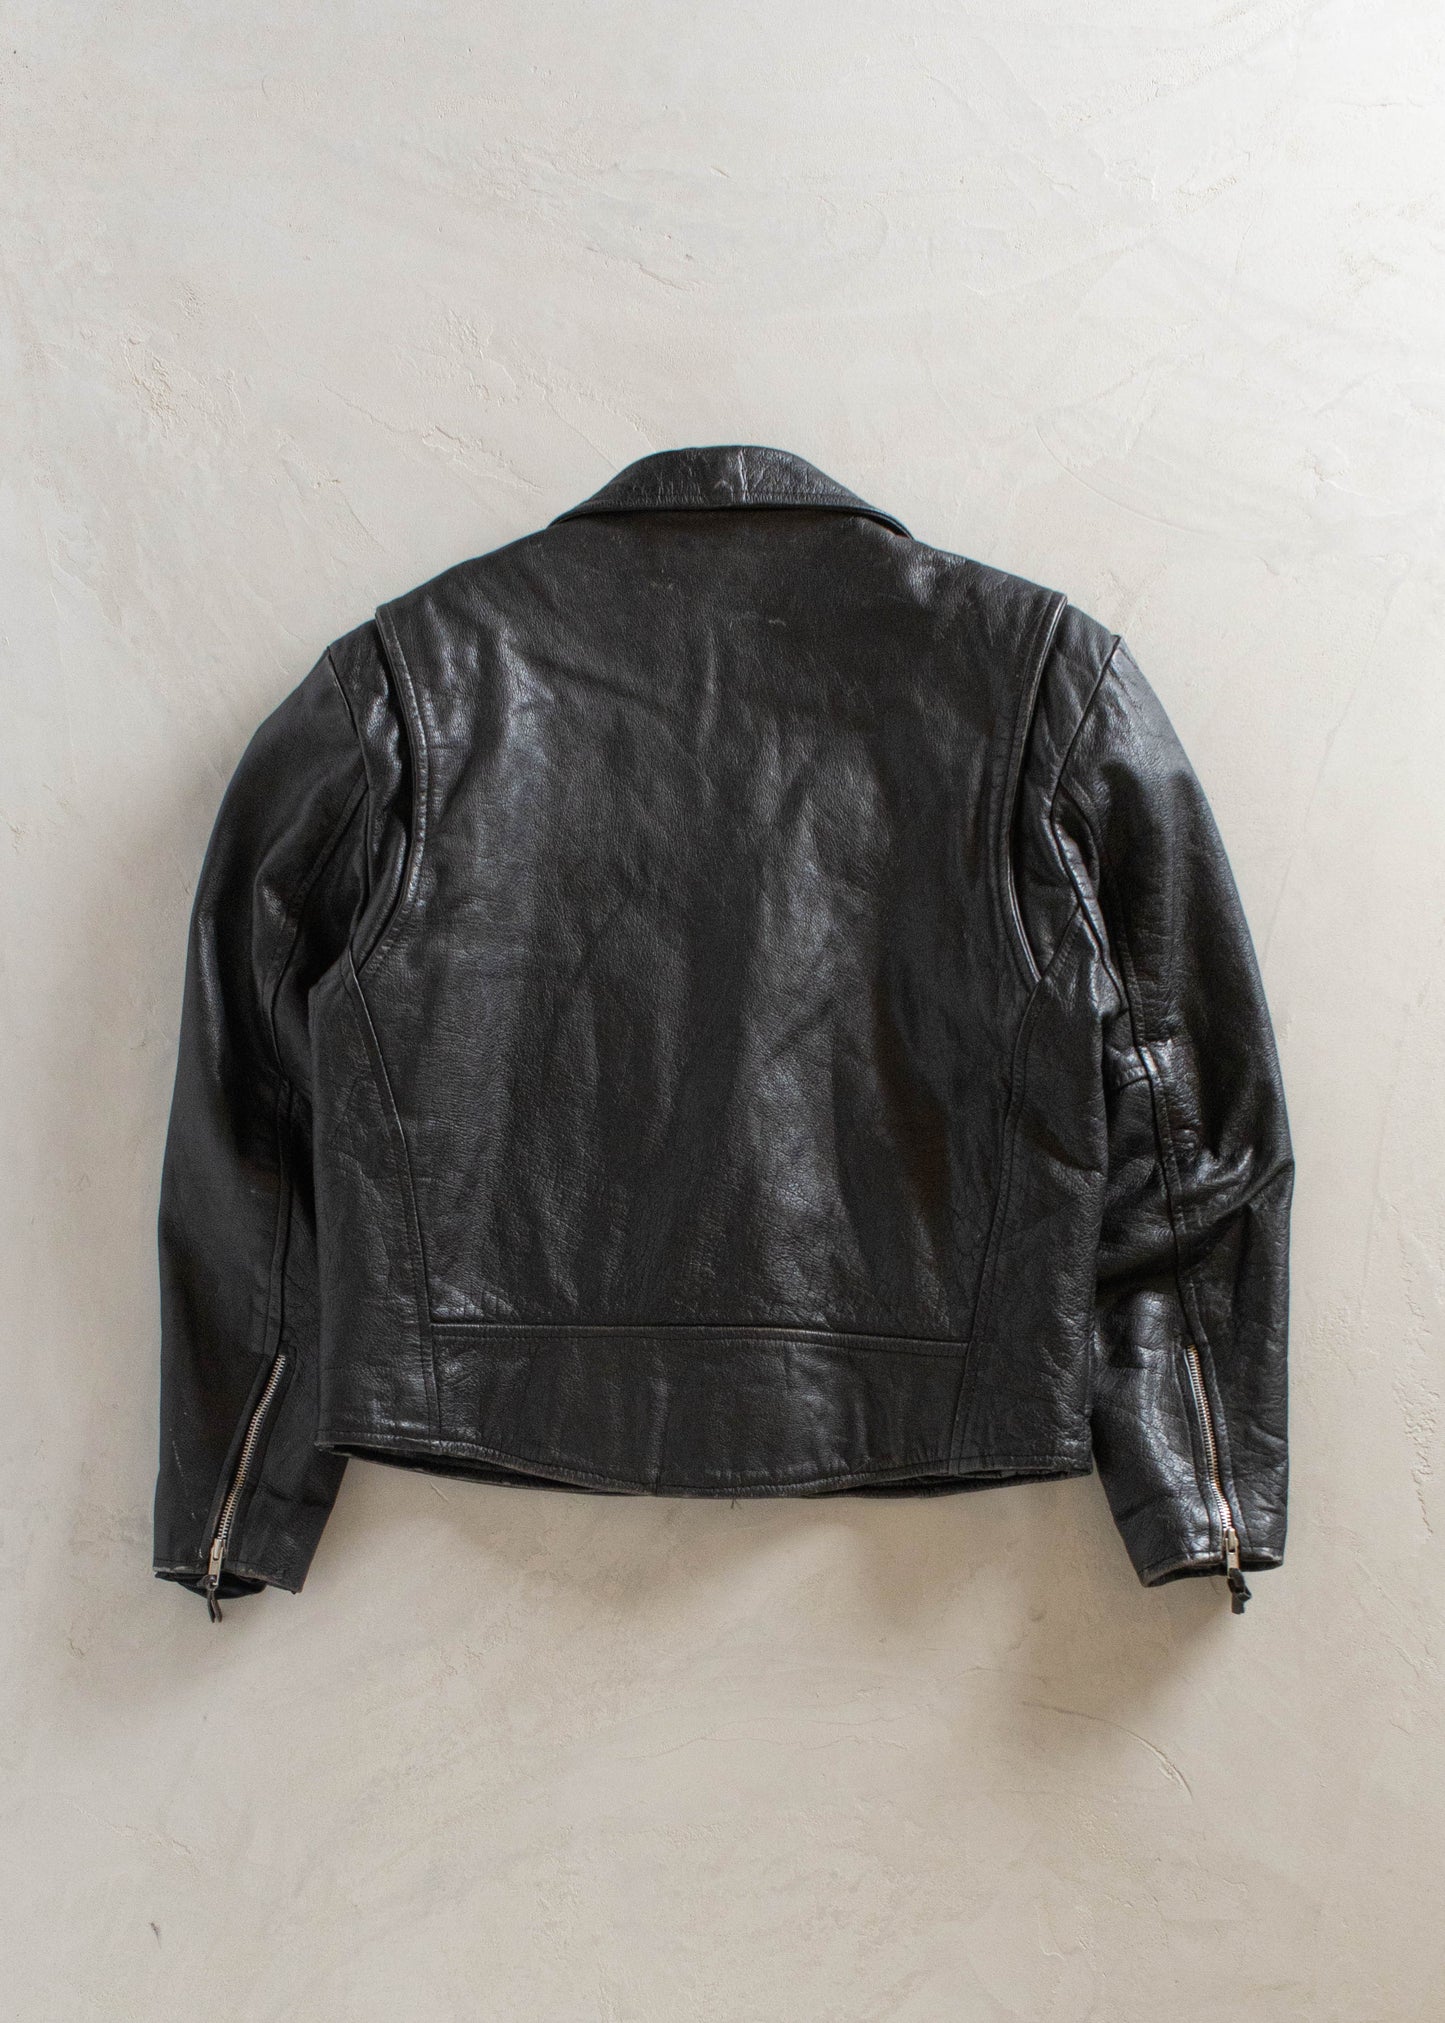 1980s Wilsons Motorcycle Leather Jacket Size M/L